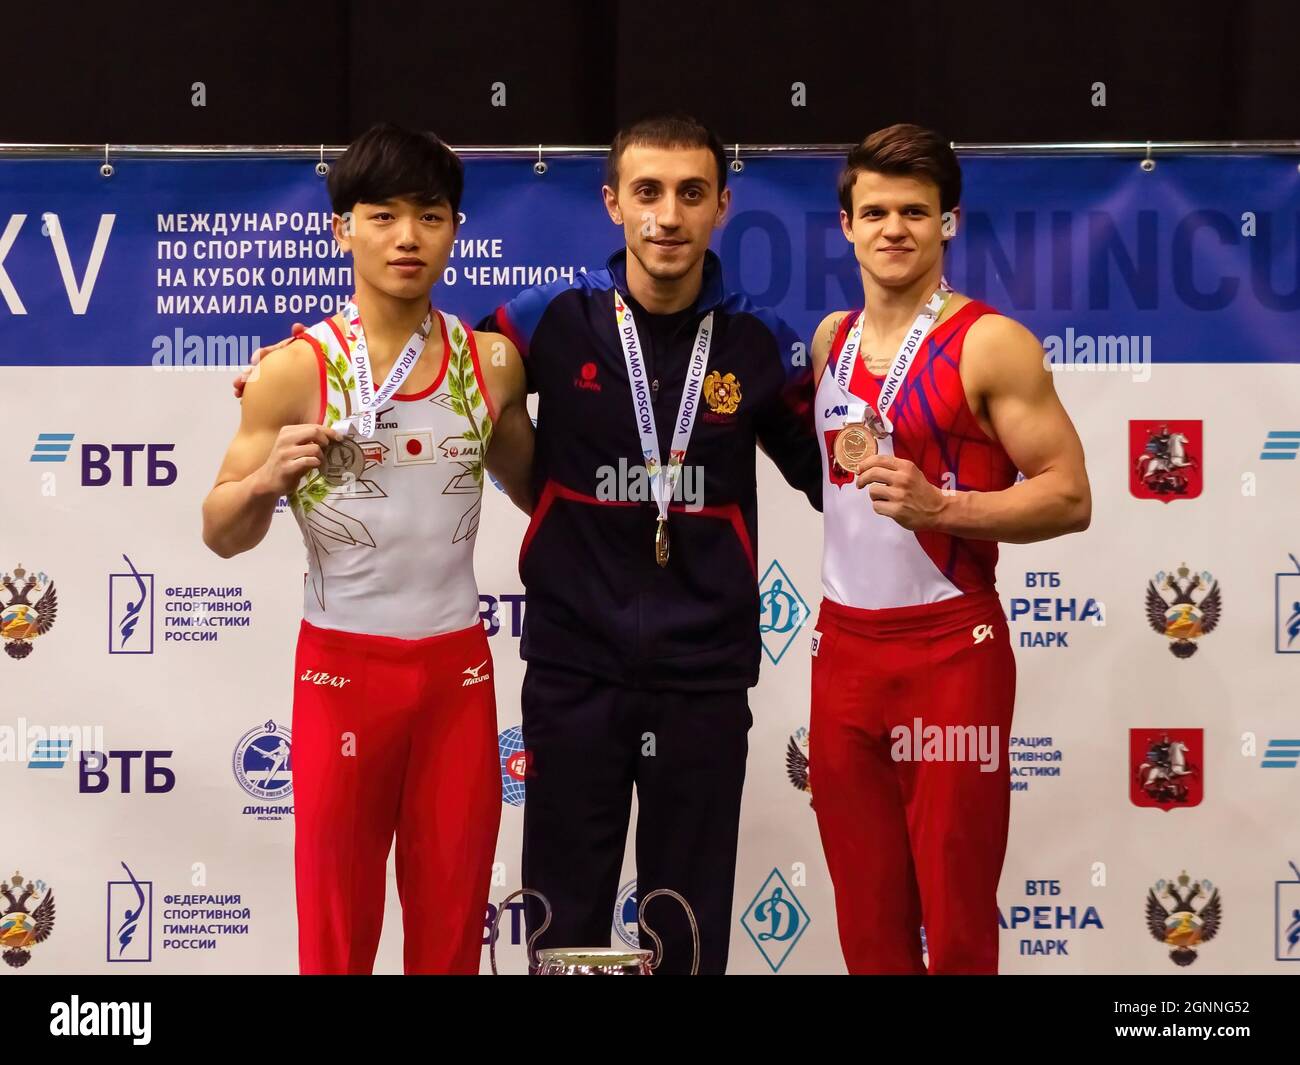 Moscow, Russia. 12th Dec, 2018. Dmitry Lankin (R), Artur Davtyan (C) and Miwa Teppi (L) seen posing with their medals during the event. The XXV International Gymnastics Tournament for the Cup of the Olympic Champion Mikhail Voronin was held at the Olimpiyskiy sports complex. (Photo by Mihail Siergiejevicz/SOPA Imag/Sipa USA) Credit: Sipa USA/Alamy Live News Stock Photo